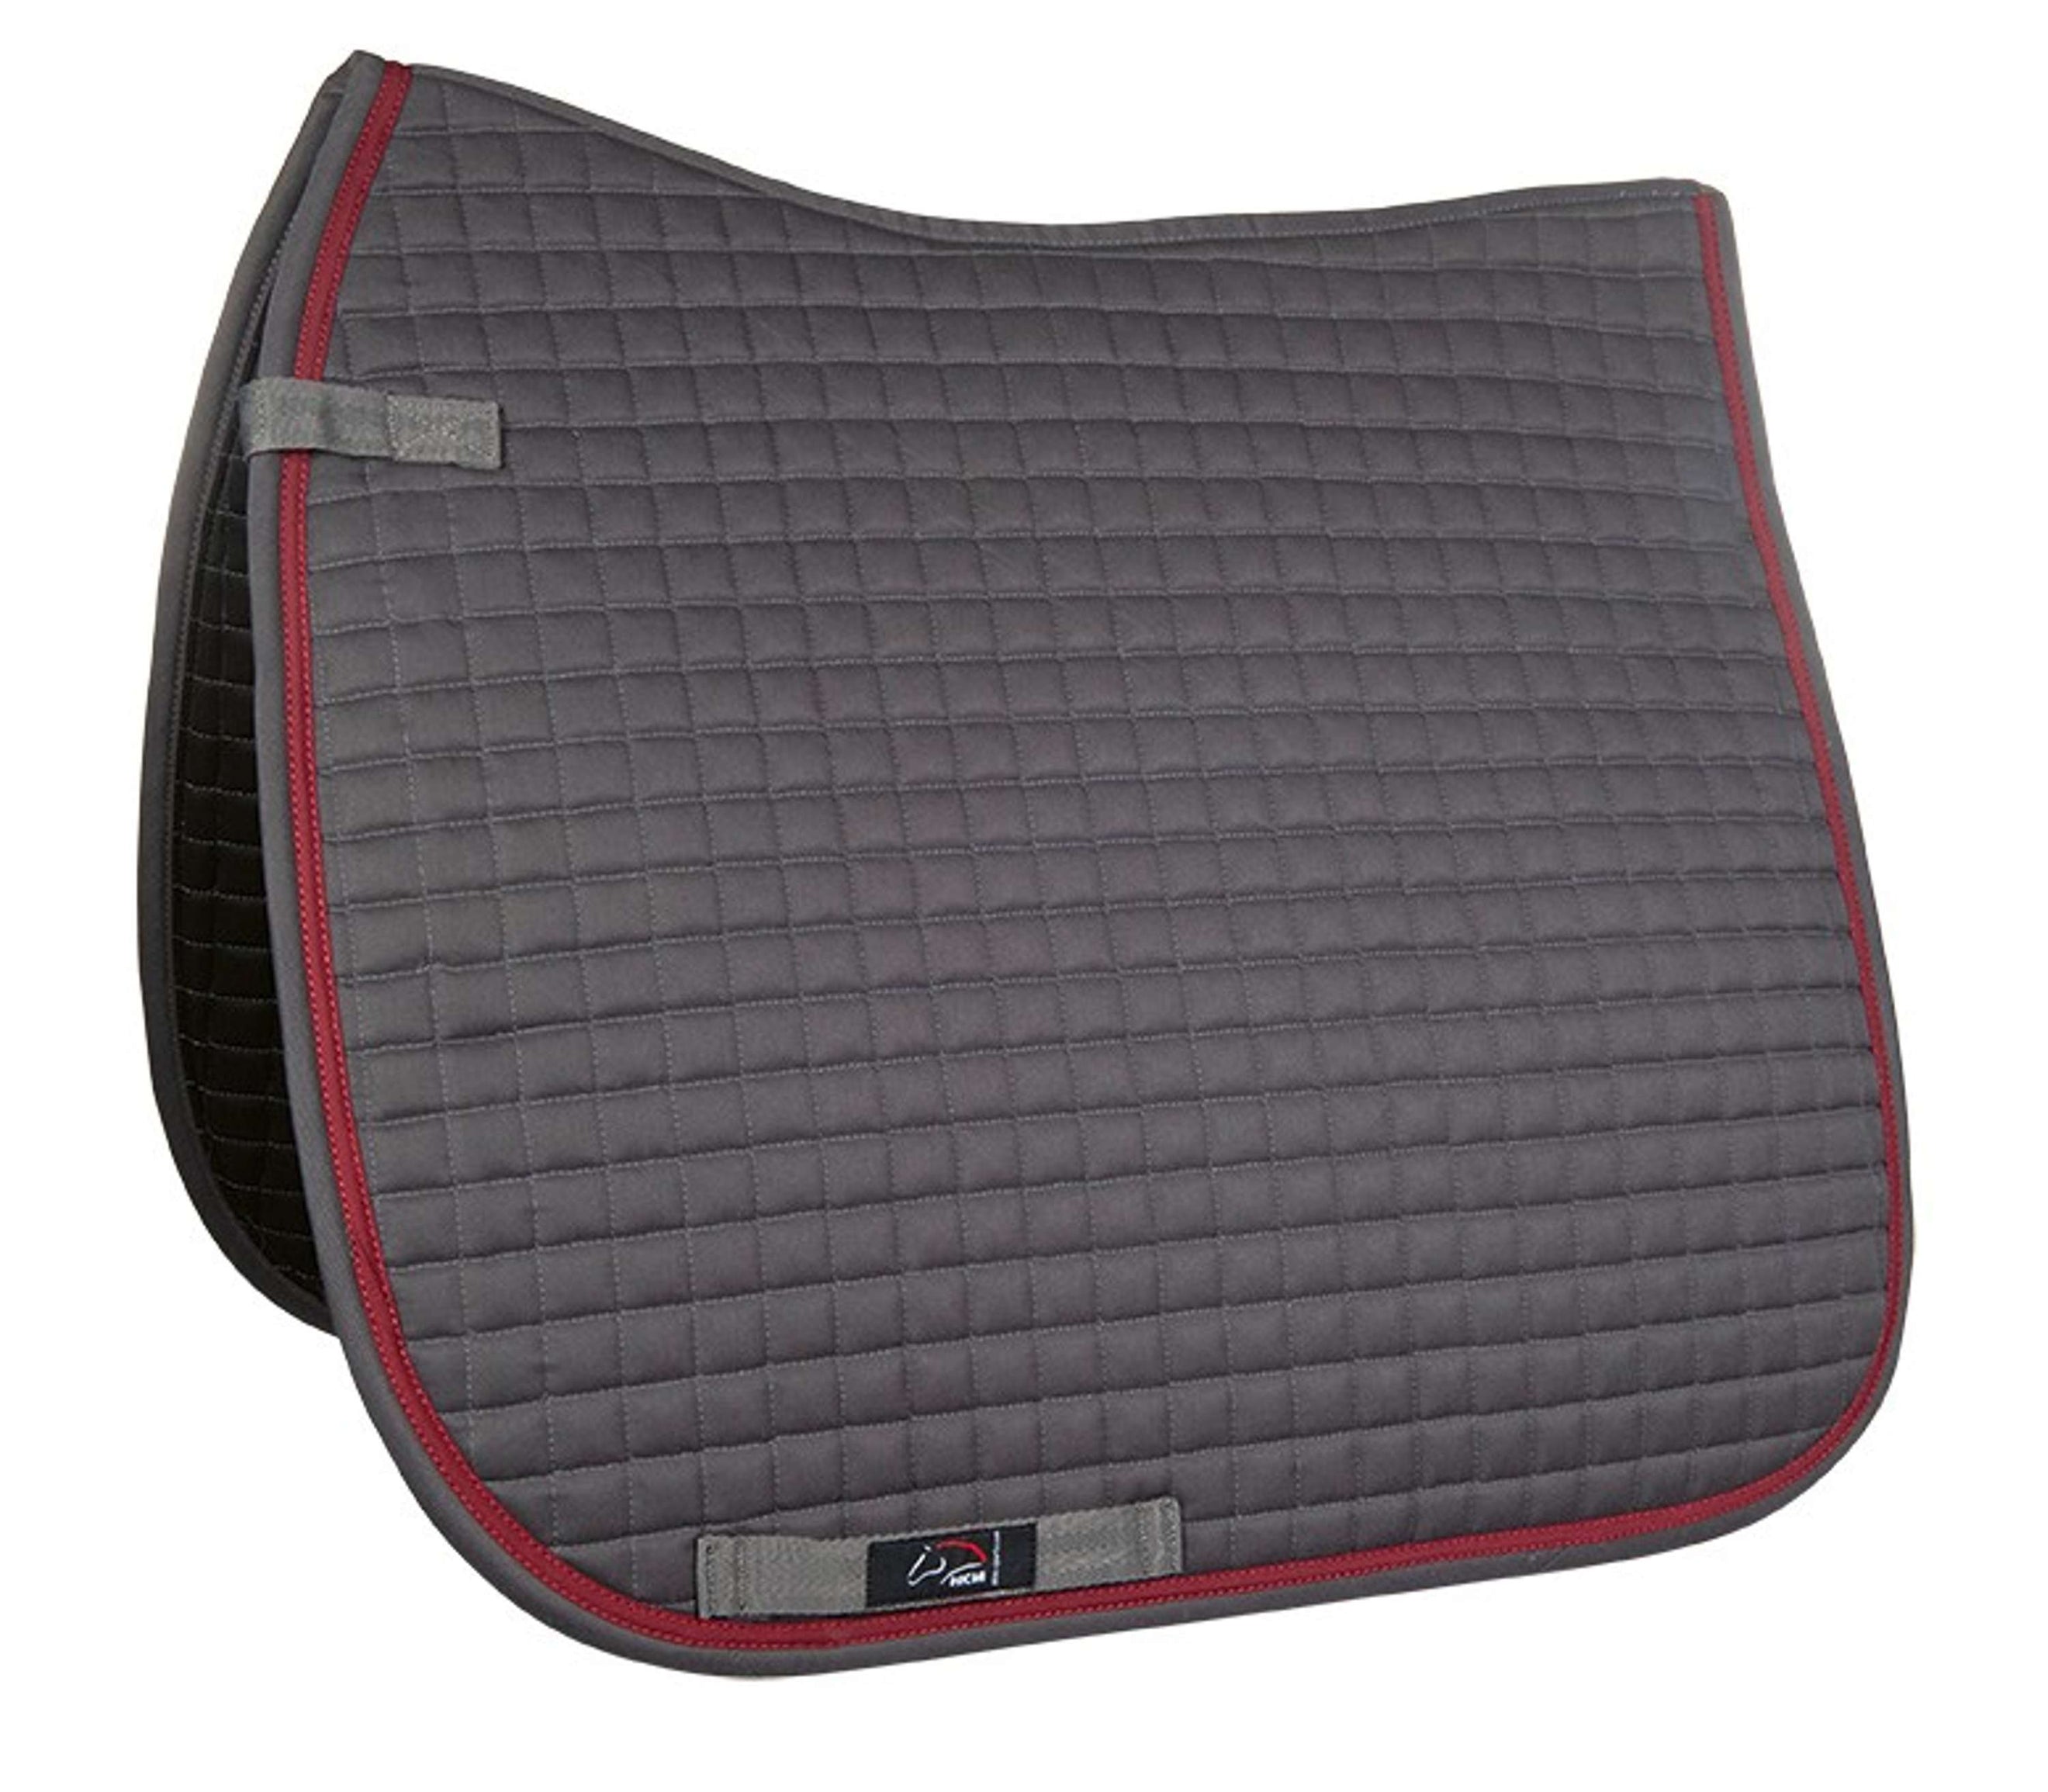 HKM Tapis de Selle Charly Dressage Rose clair